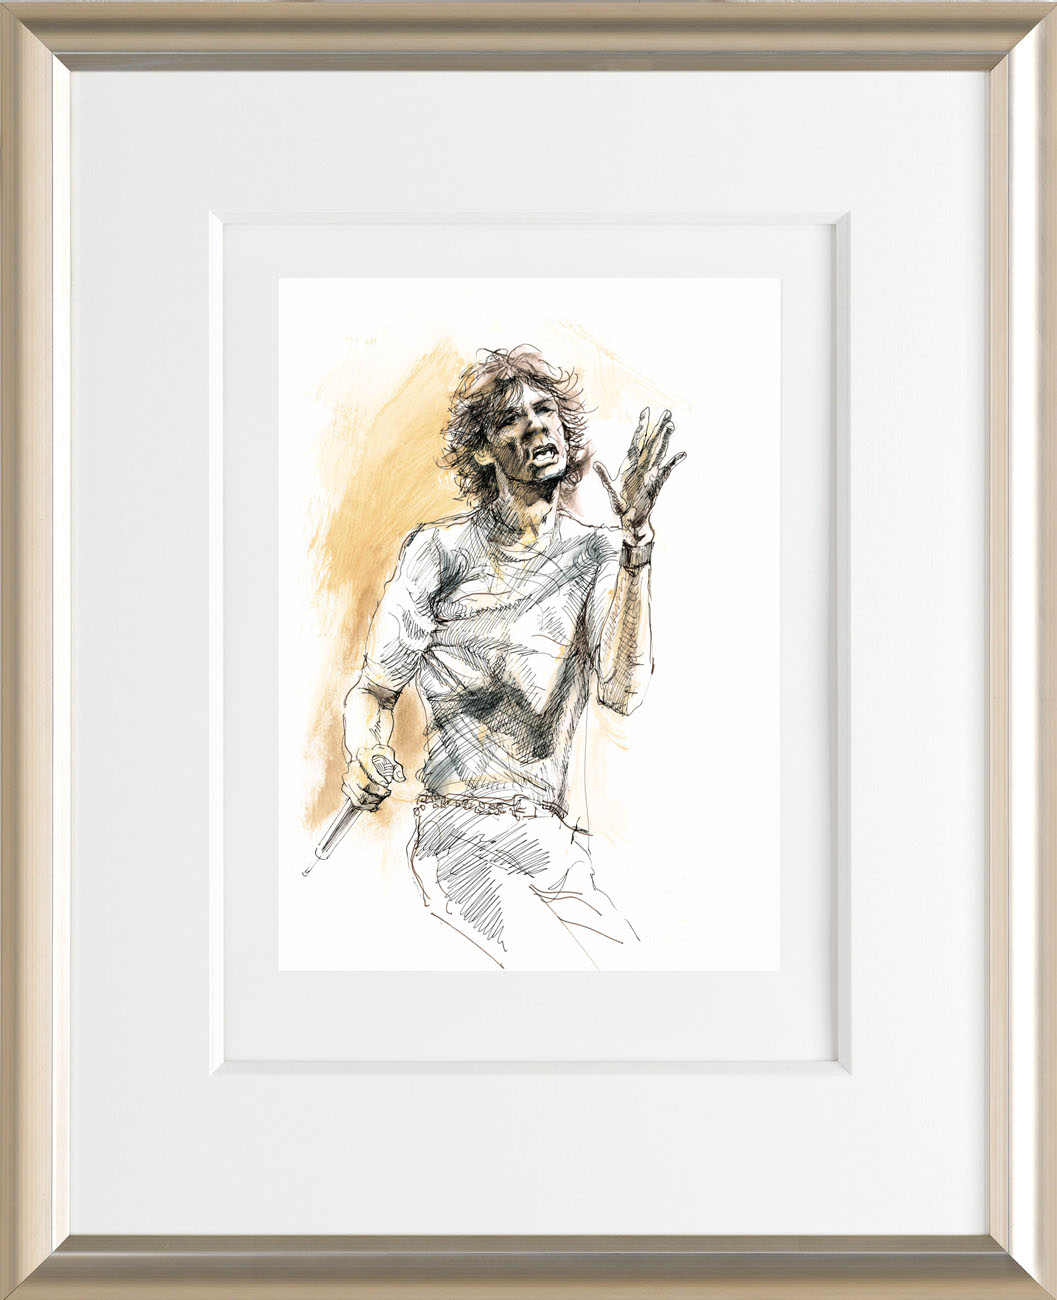 Ronnie Wood Live Studies Collection